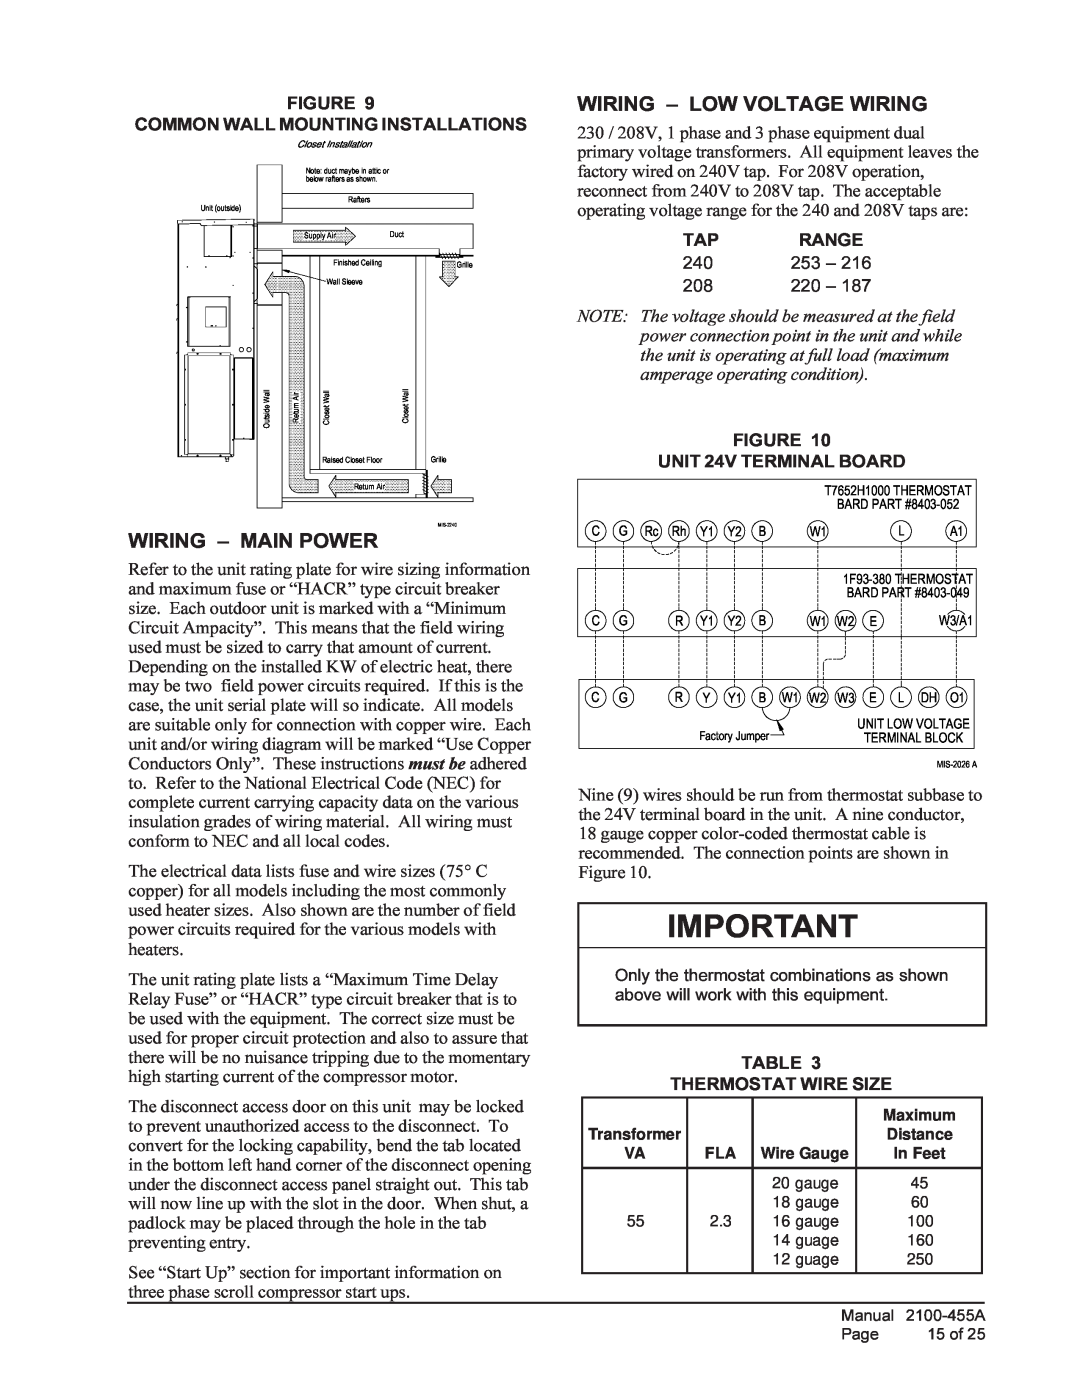 Bard CH4S1, CH5S1, CH3S1 installation instructions Wiring - Main Power, Wiring - Low Voltage Wiring 